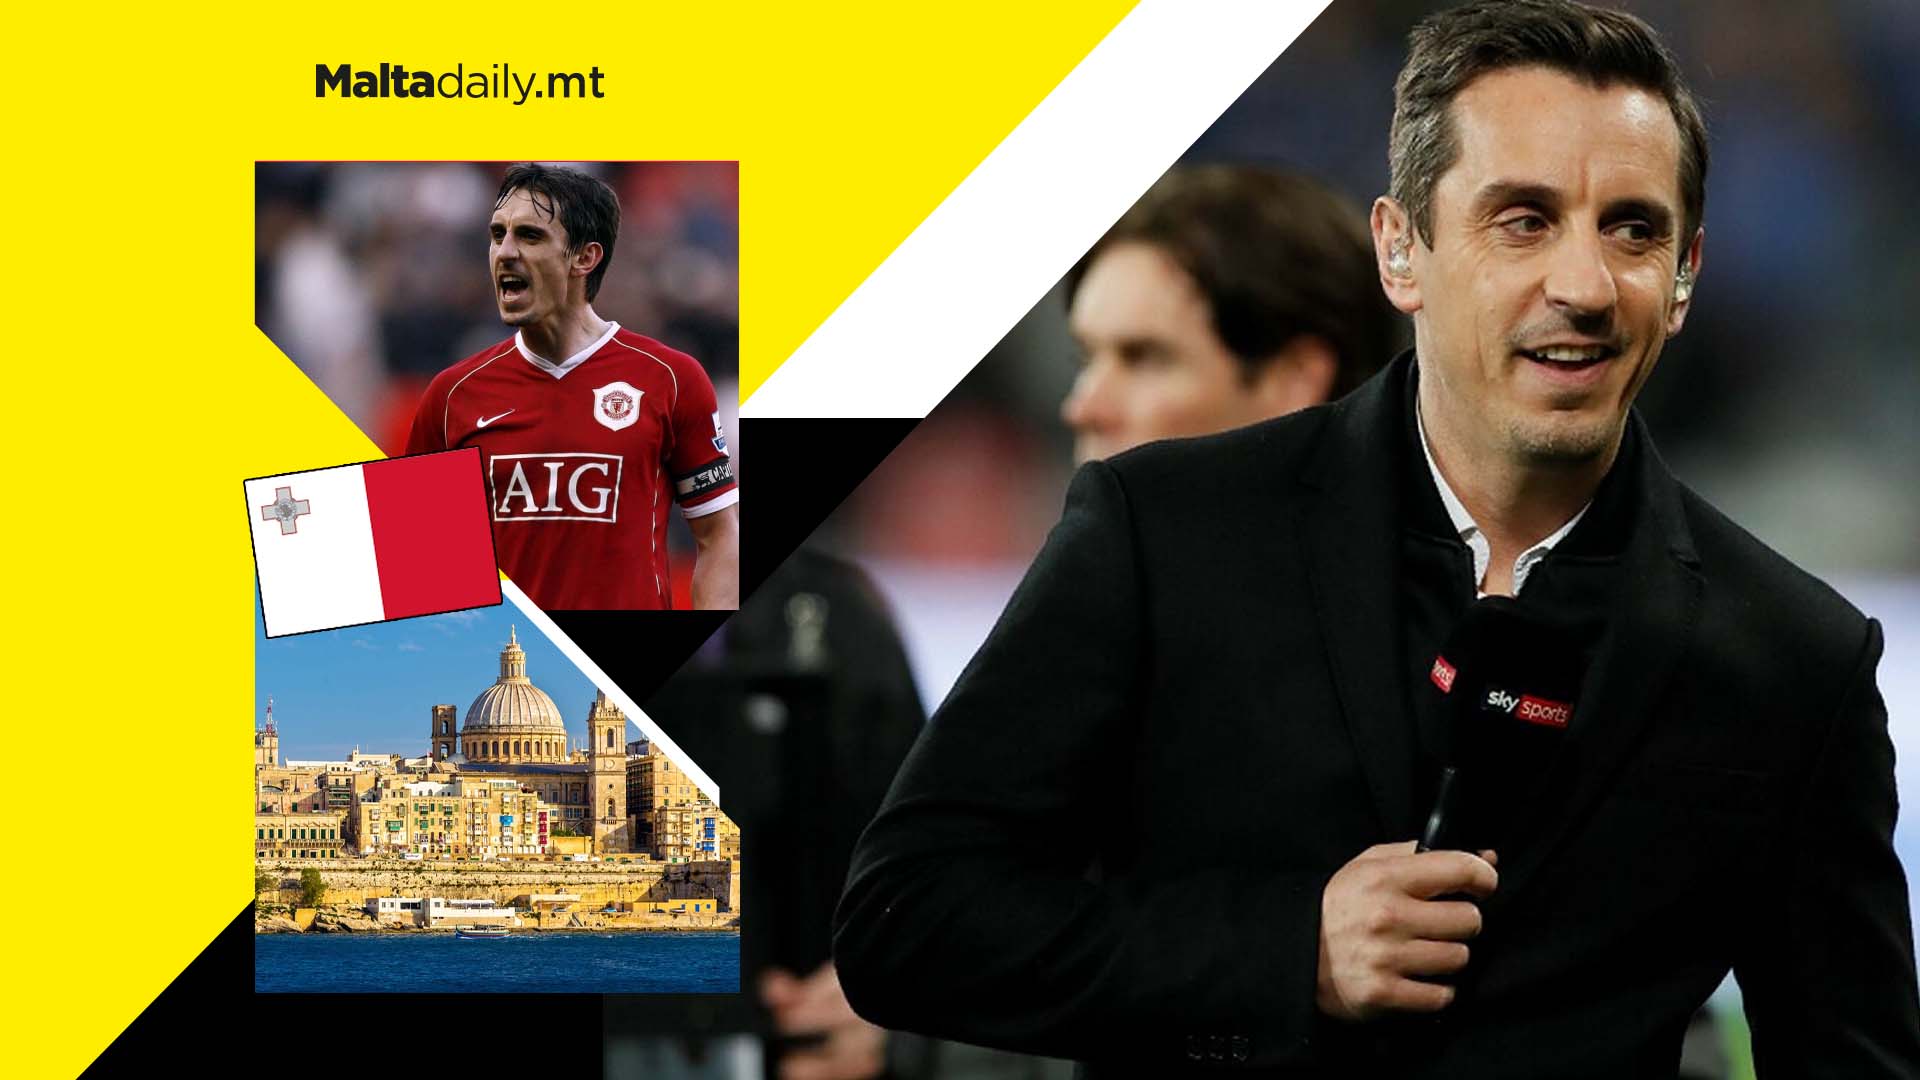 England coach Gary Neville says Malta is his favourite destination abroad